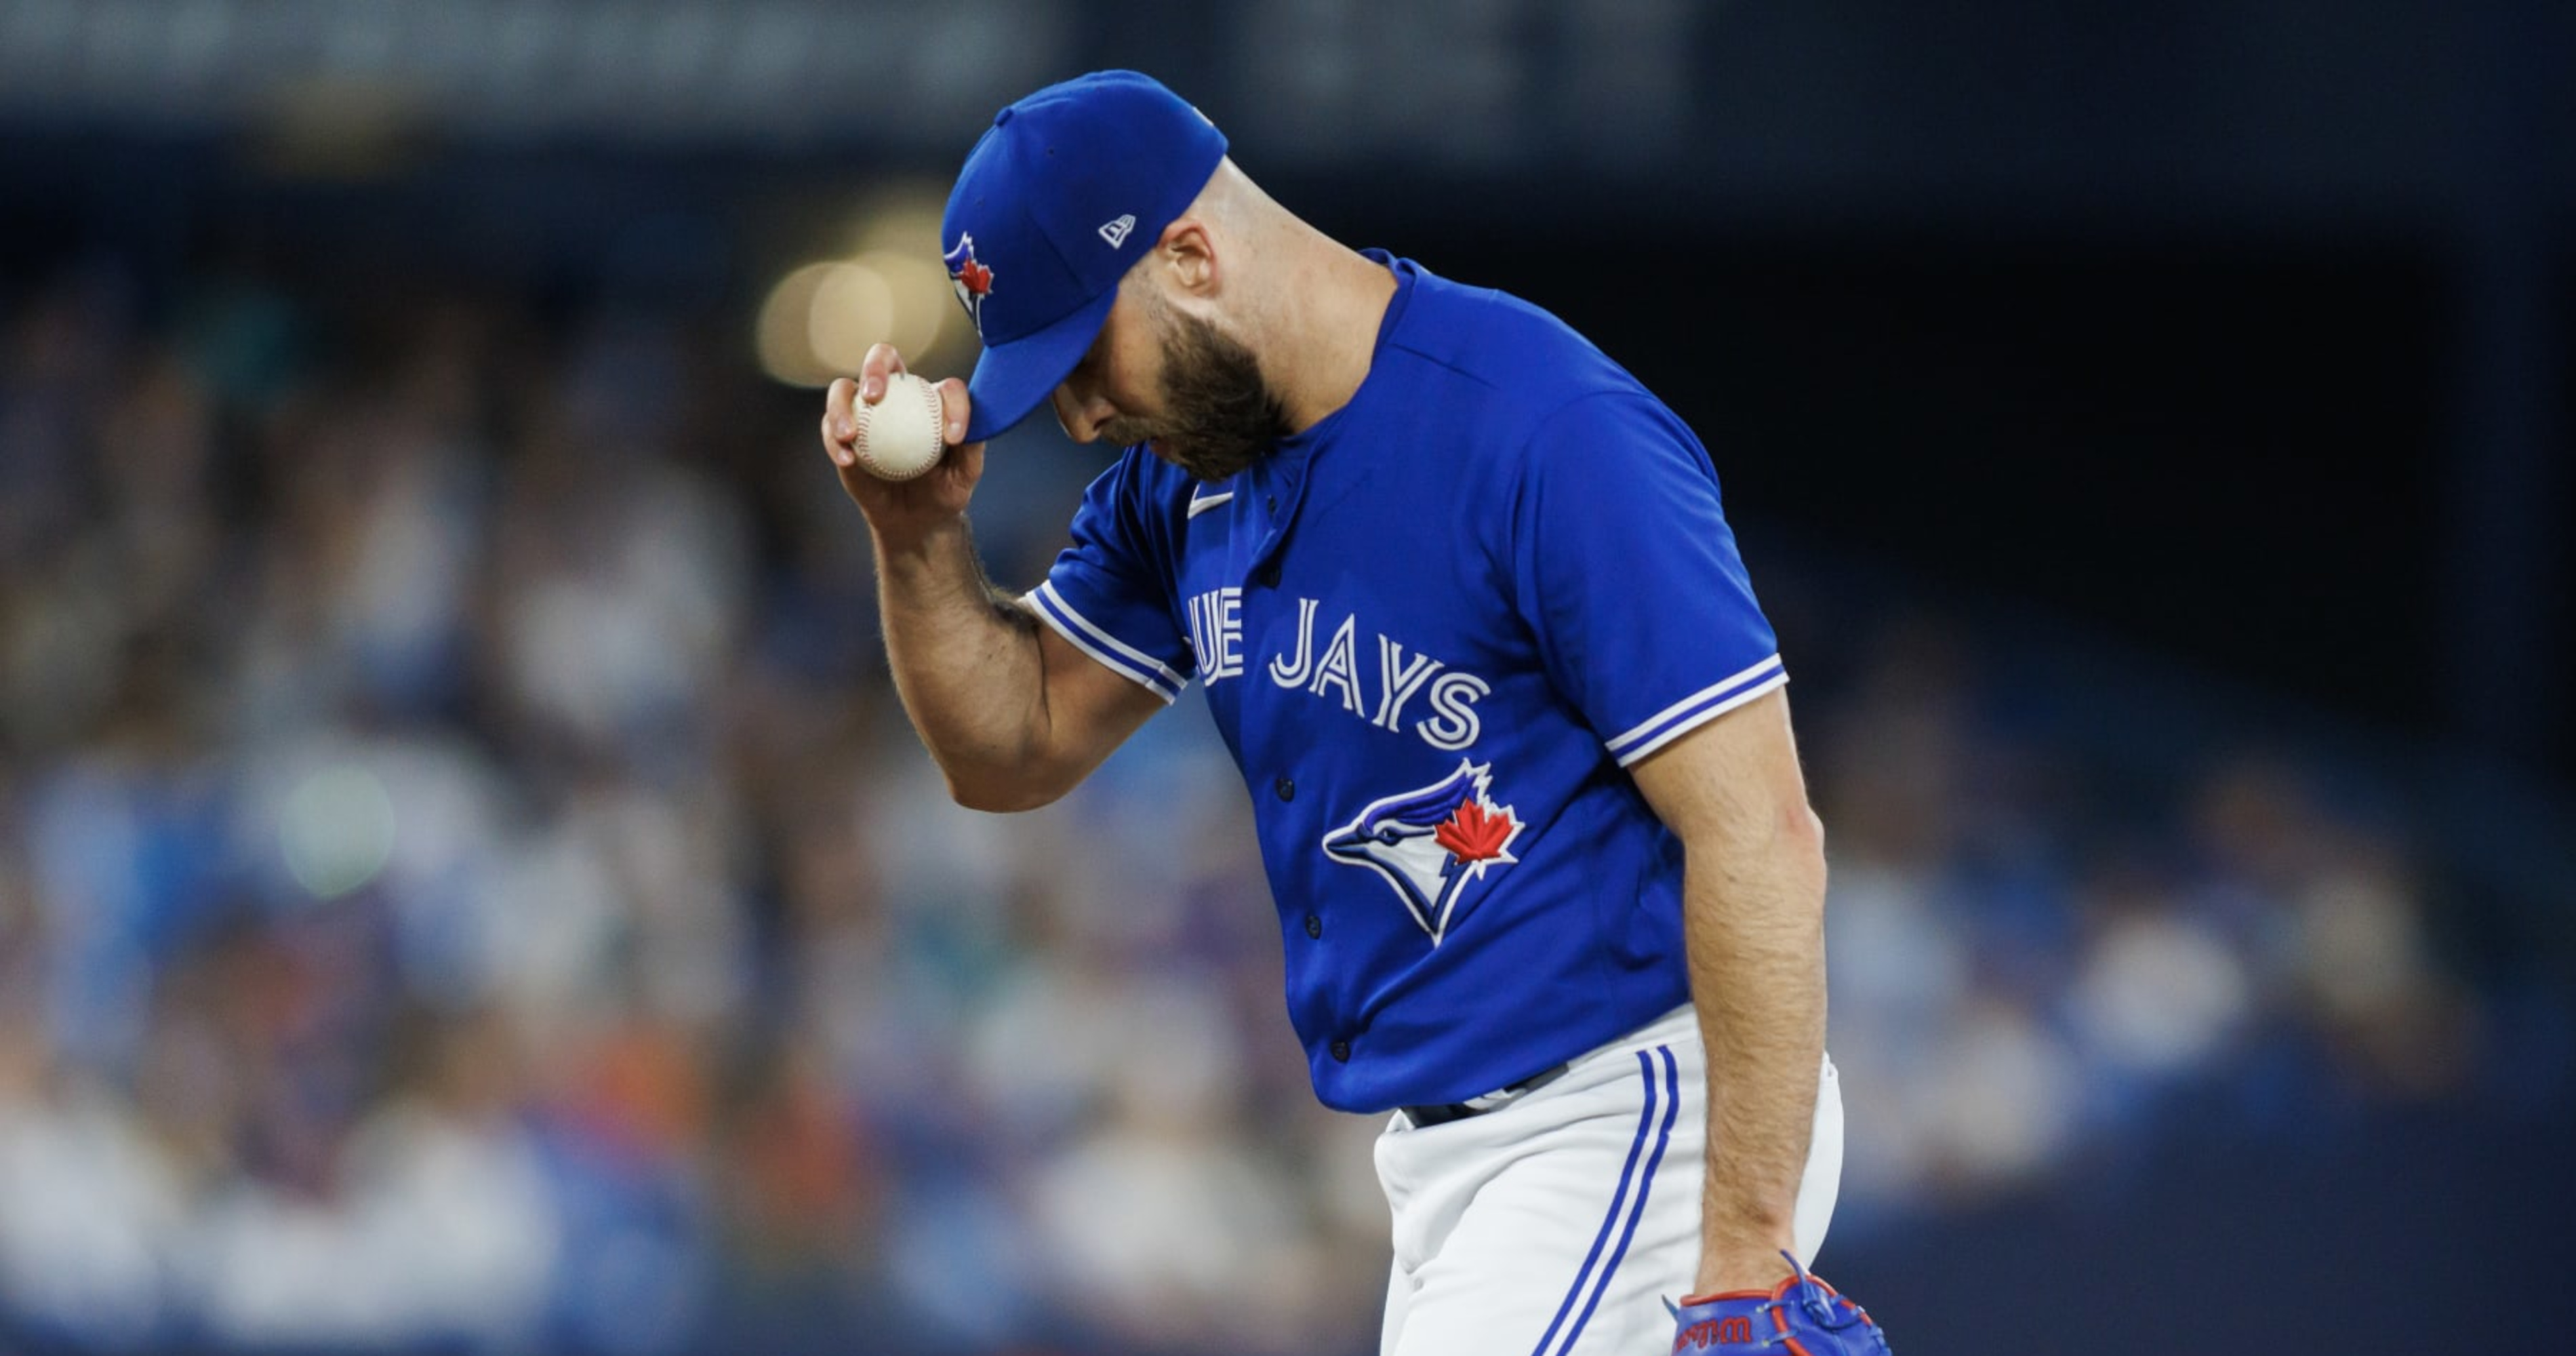 Blue Jays' Anthony Bass apologizes after sharing 'hurtful' video